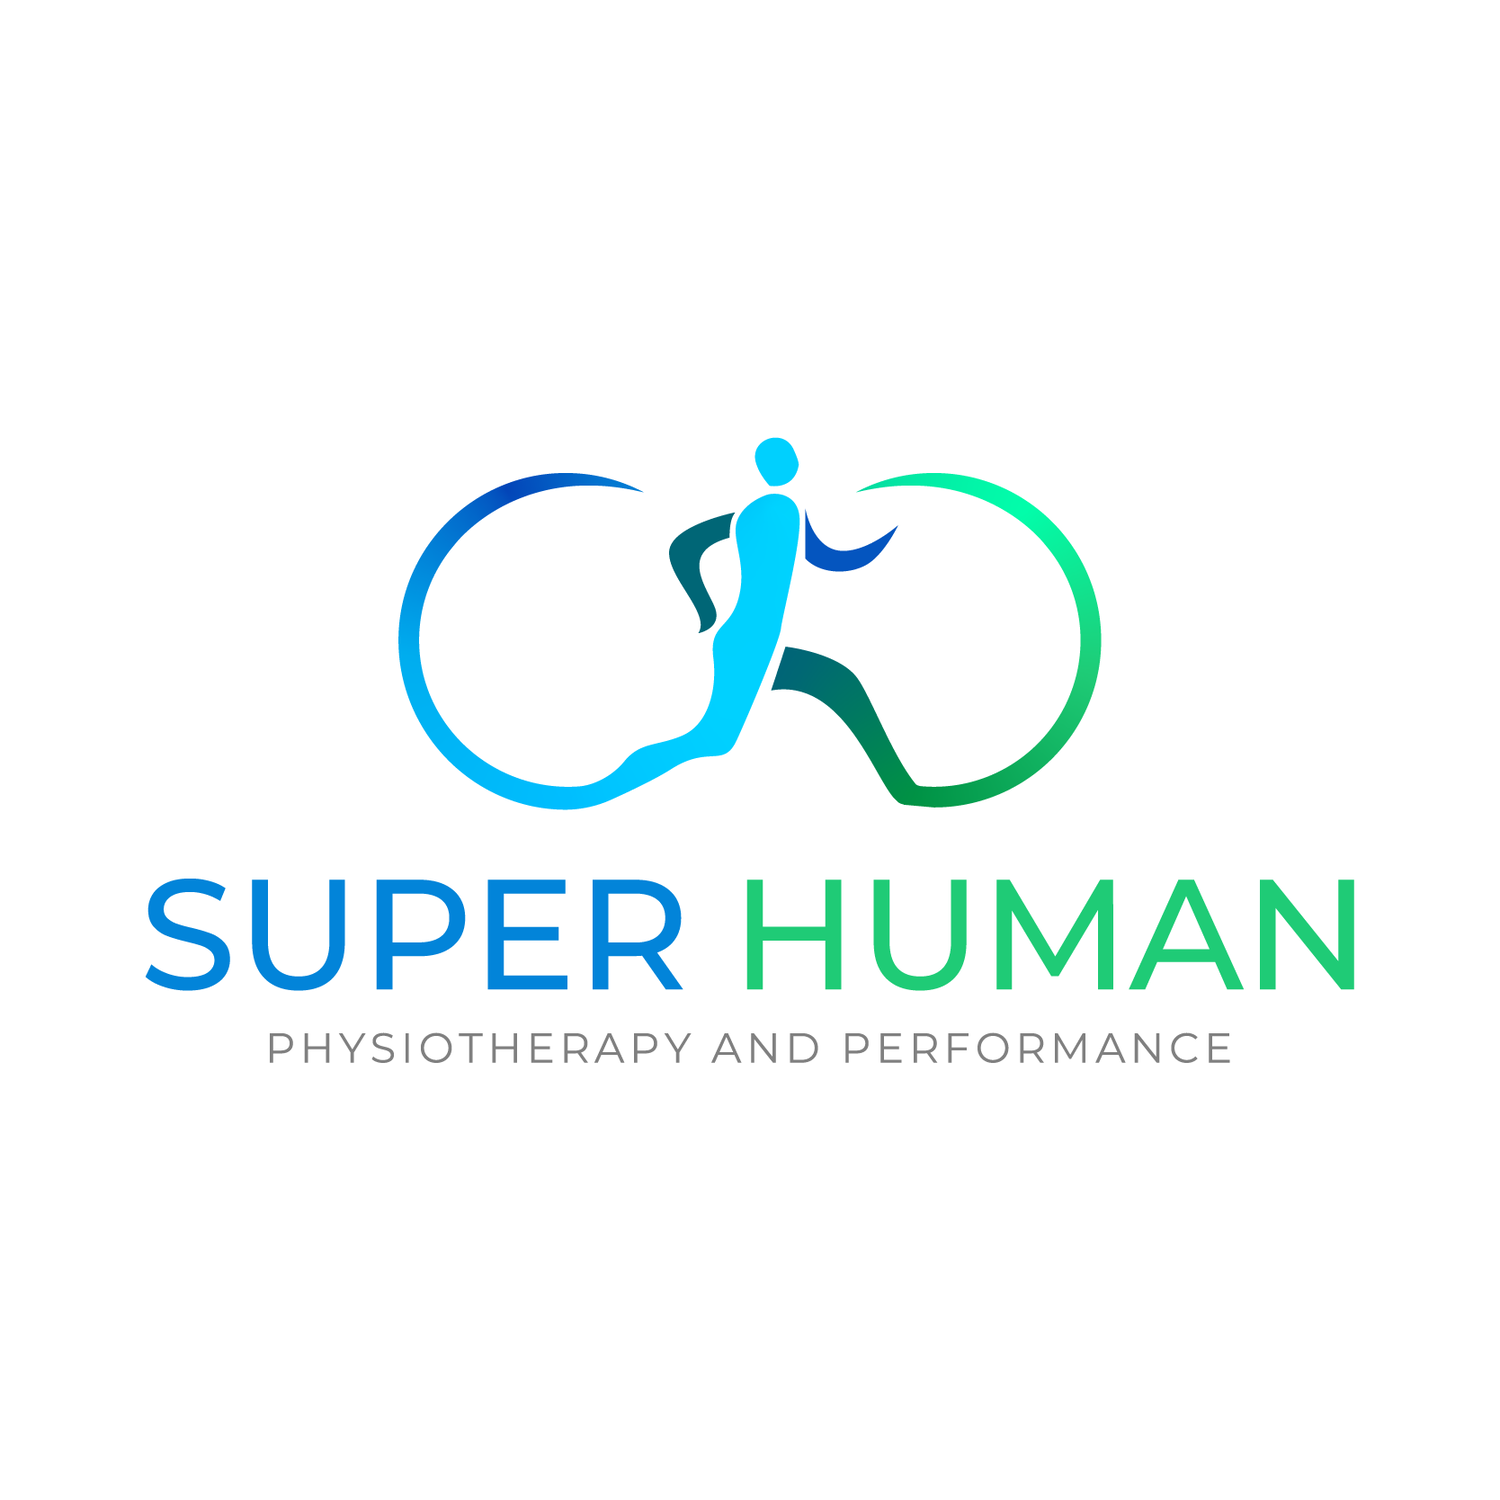 Superhuman Physiotherapy and Performance